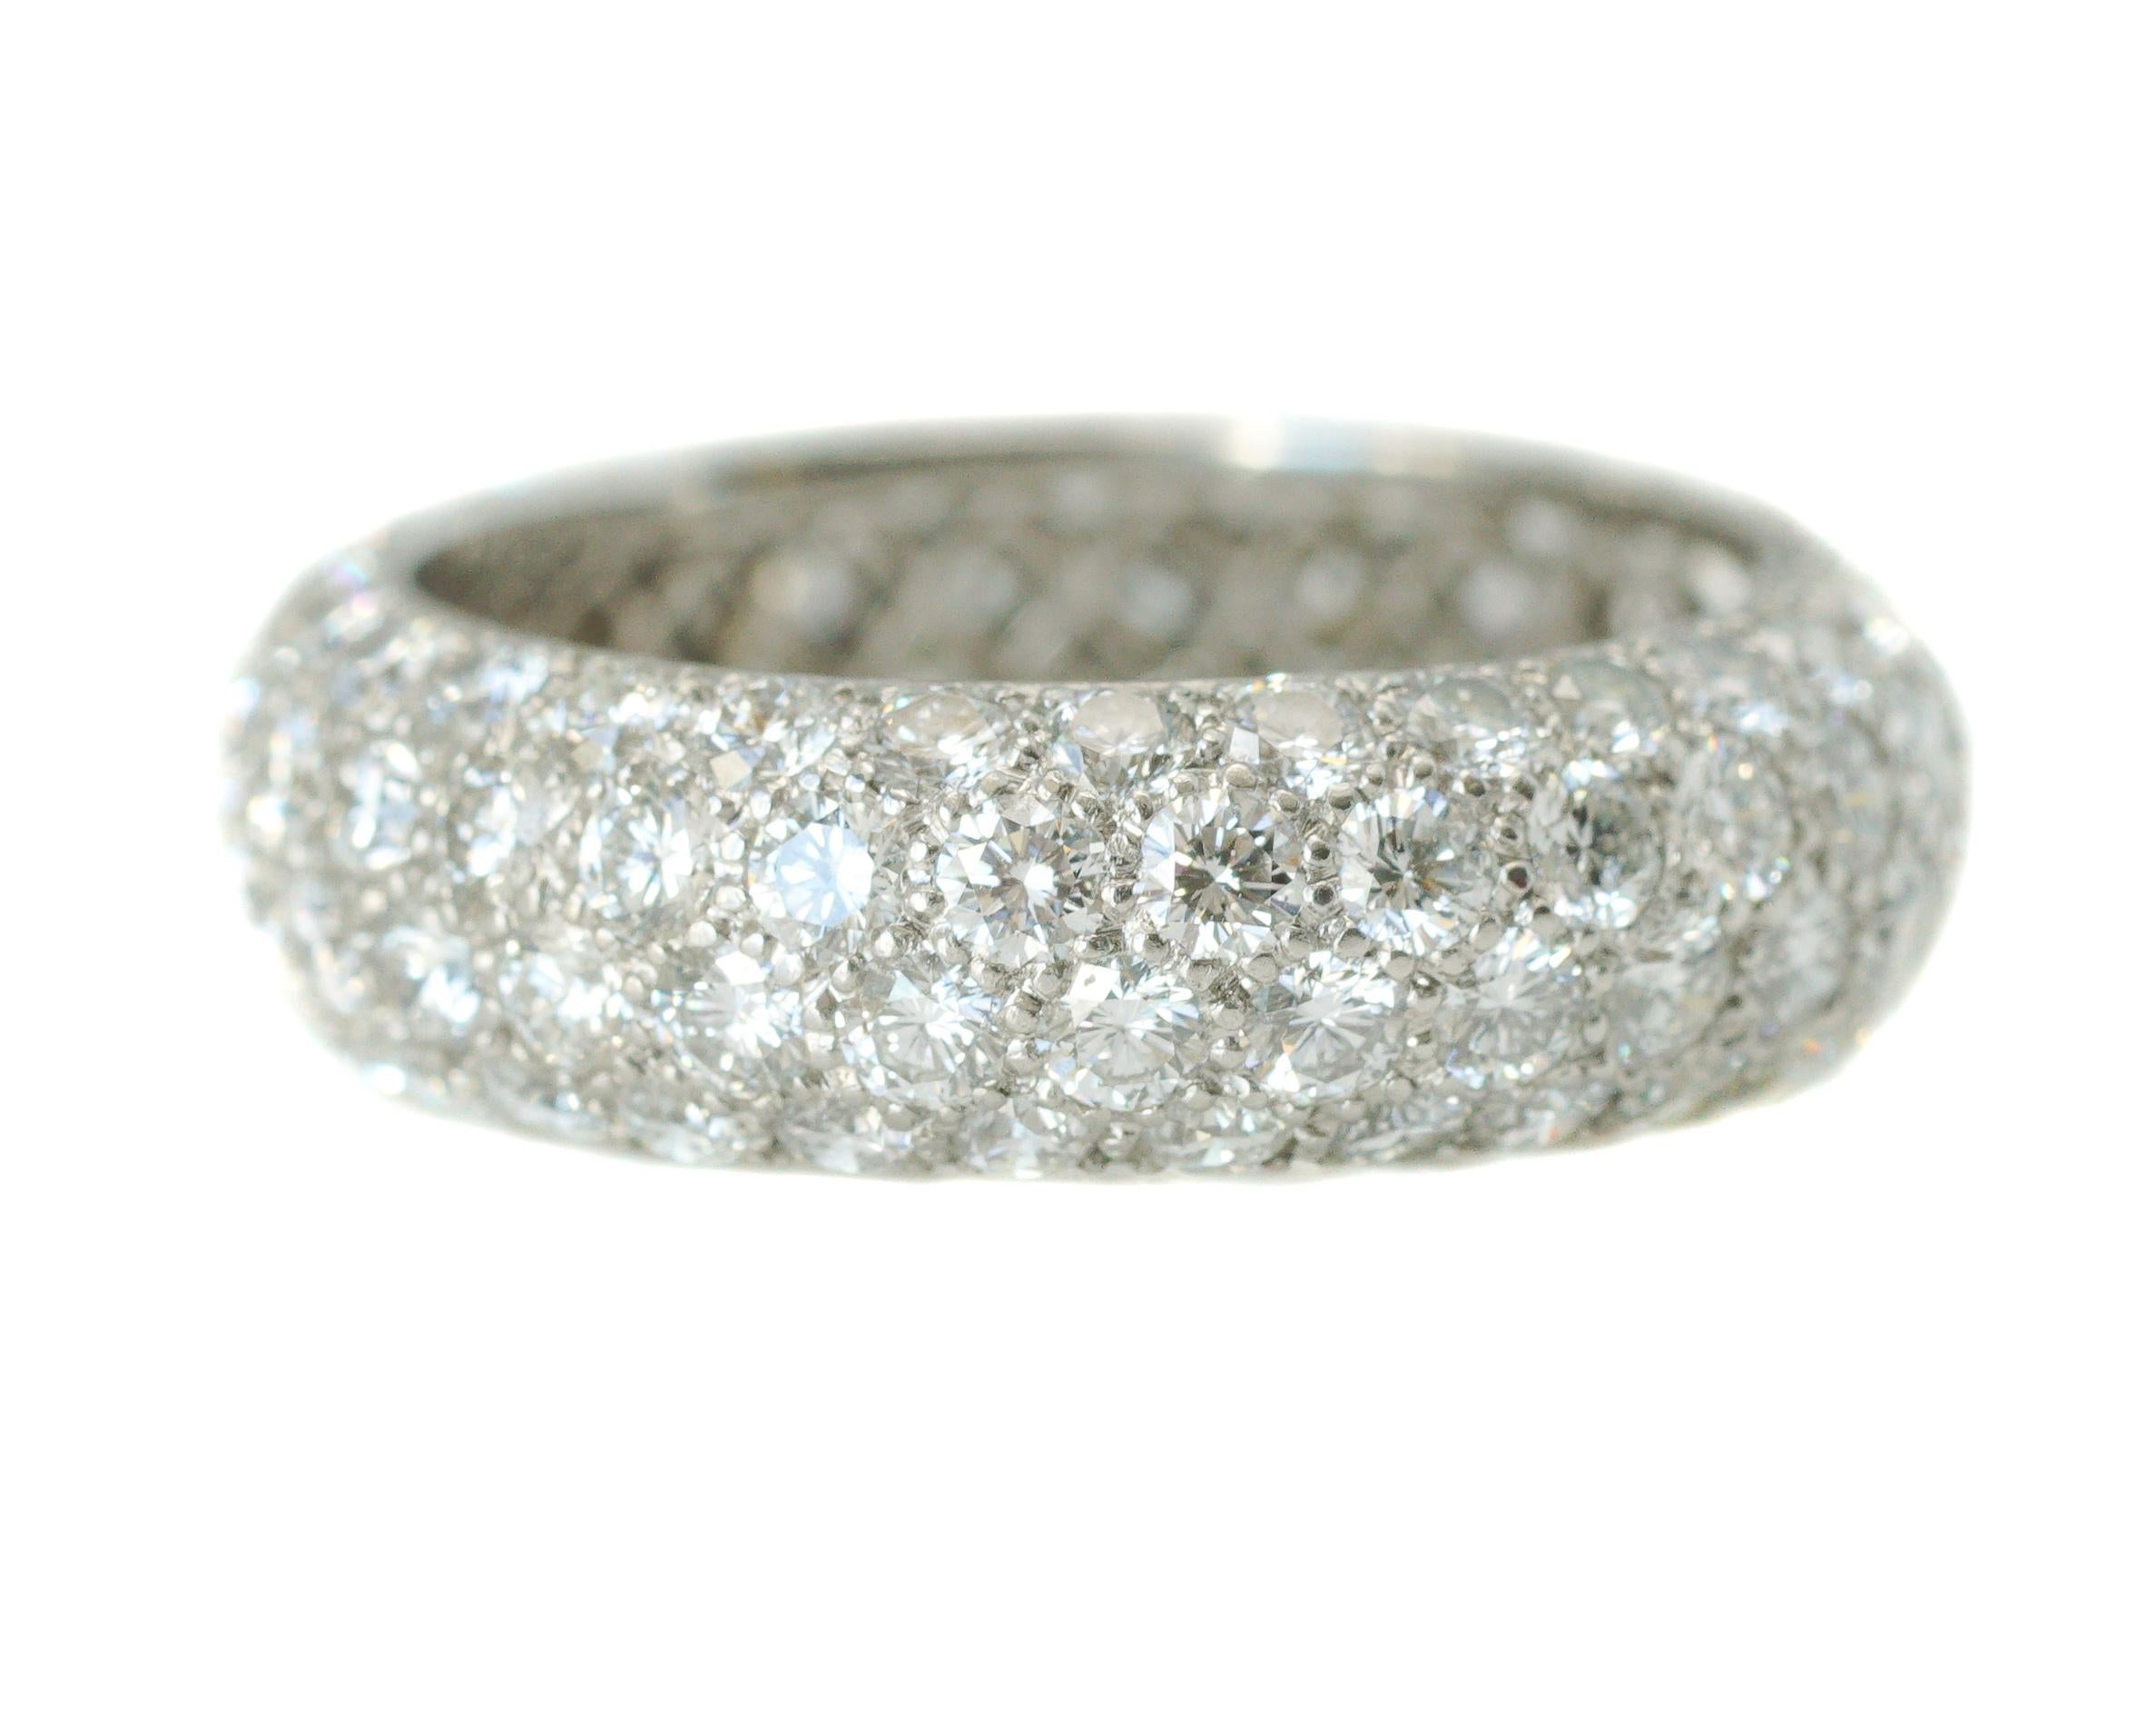 Tiffany and Co. Etoile 4 Row Band Ring - Platinum, Diamonds

Features:
4 Rows of Pave set Round Brilliant Diamonds
3.0 carats total Round Brilliant Diamonds
Platinum Setting
Convex Rounded Profile
Band is 6 millimeters wide
Finger to top of ring